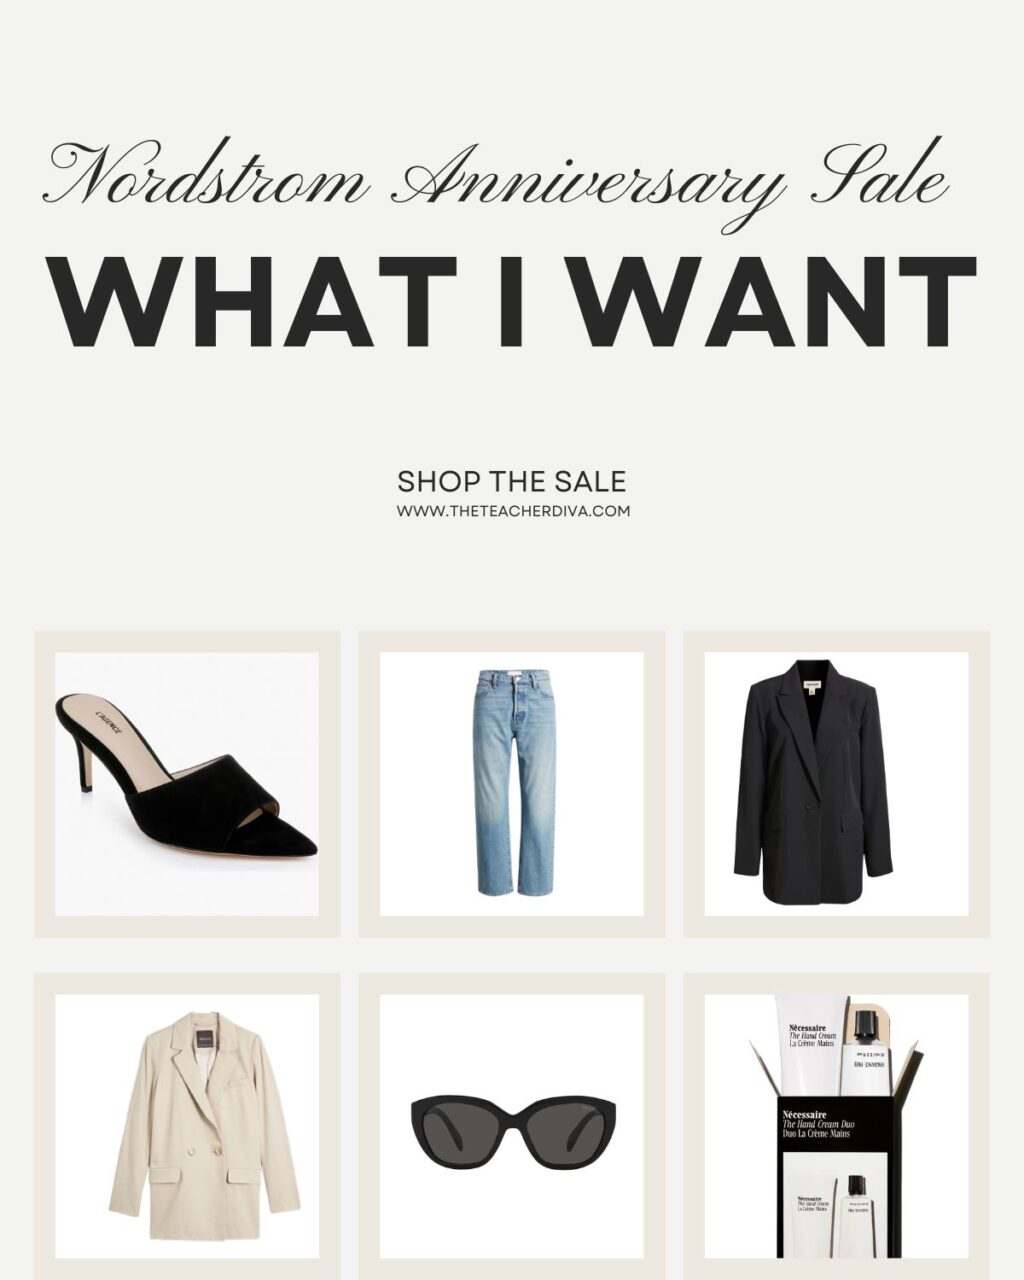 What I Want from the Nordstrom Anniversary Sale 2023